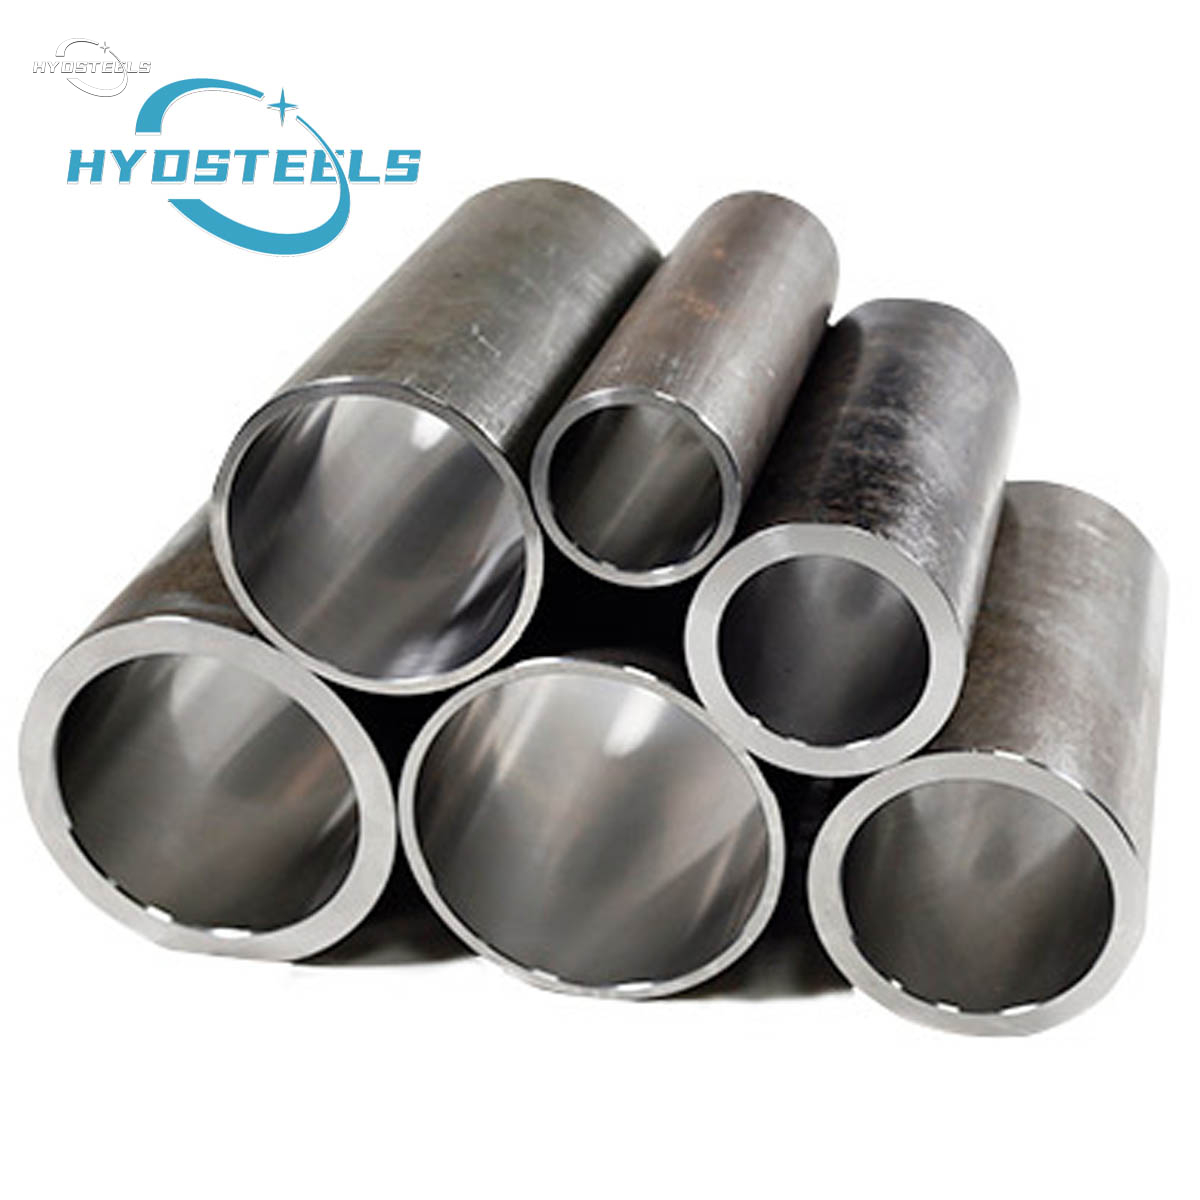 Stainless Steel Honed Cylinder Tube Drawn Seamless Honed Skiving Pipes Manufacturer in China